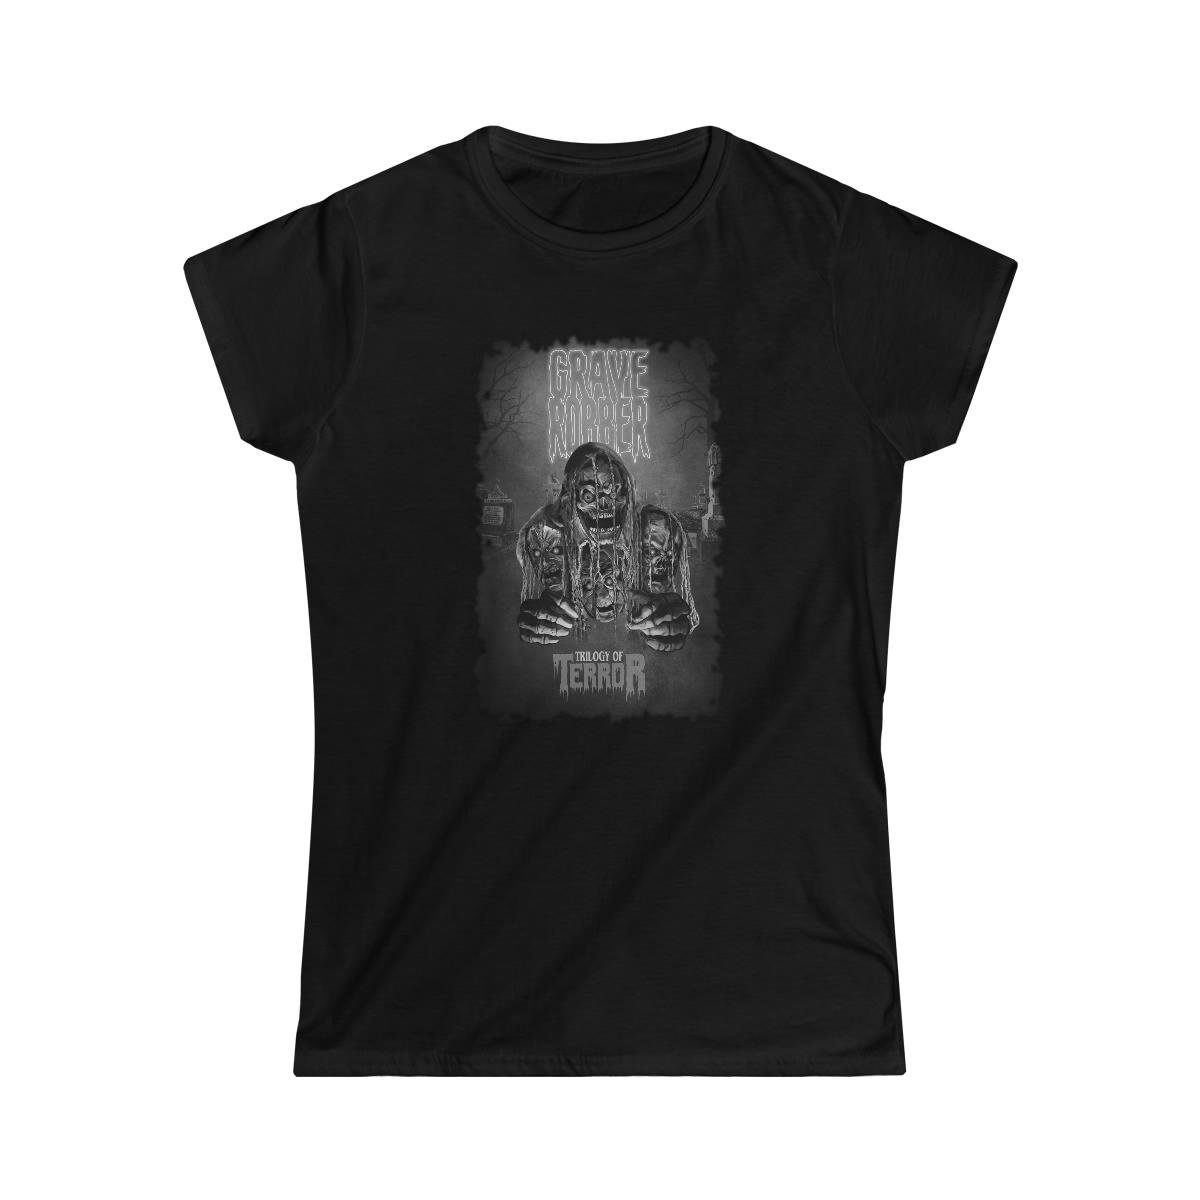 Grave Robber Trilogy of Terror (Limited Edition Black and White) Women’s Short Sleeve Tshirt